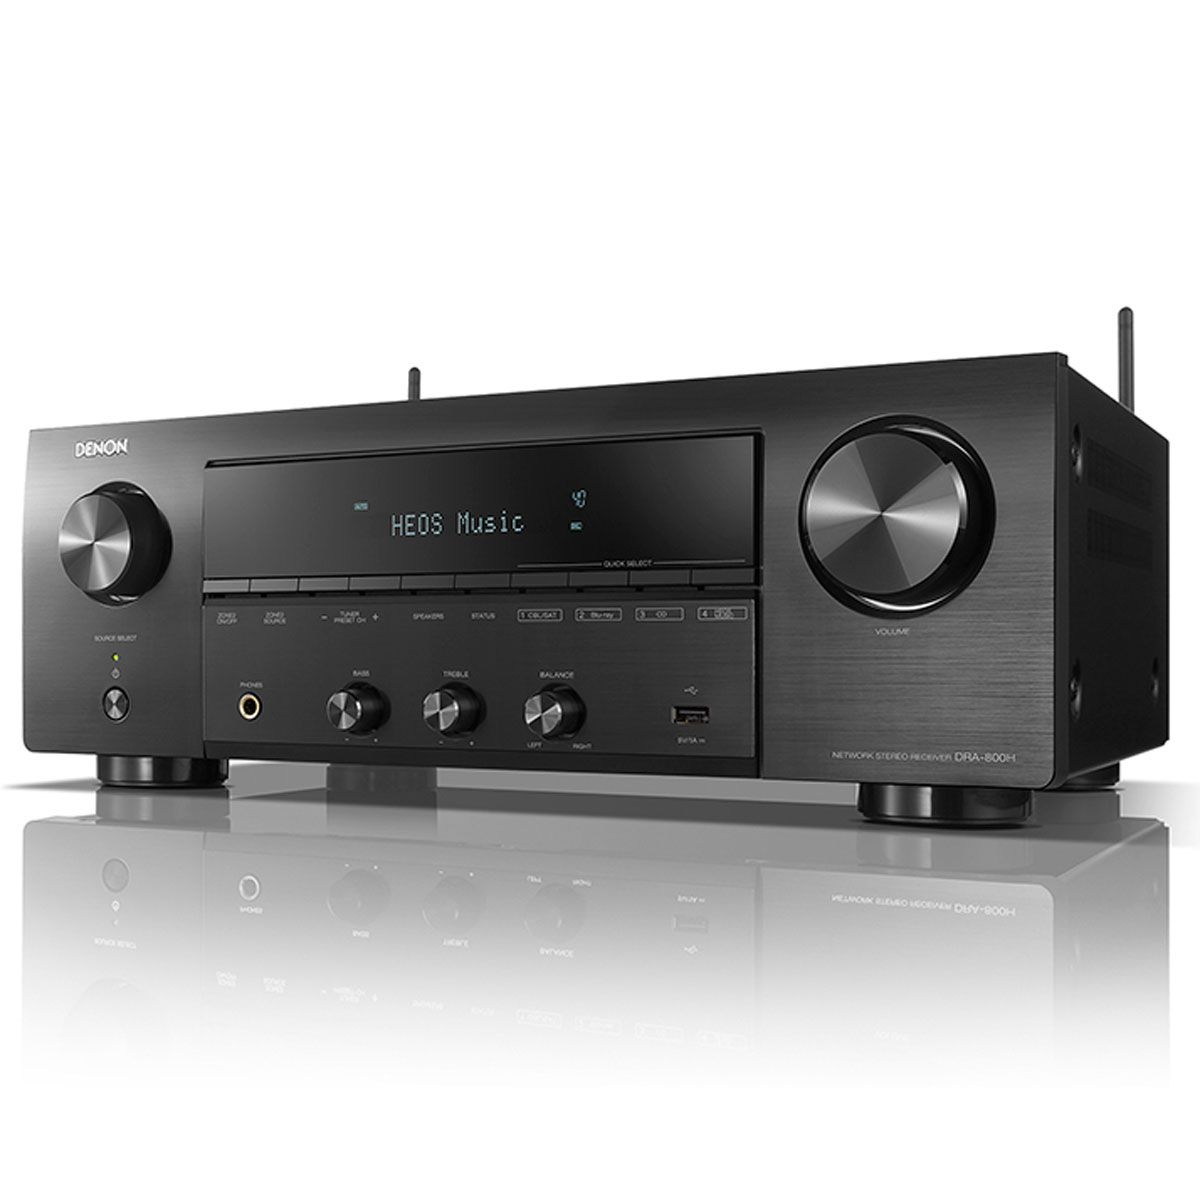 Denon DRA-800H Stereo Network Receiver - front angled view